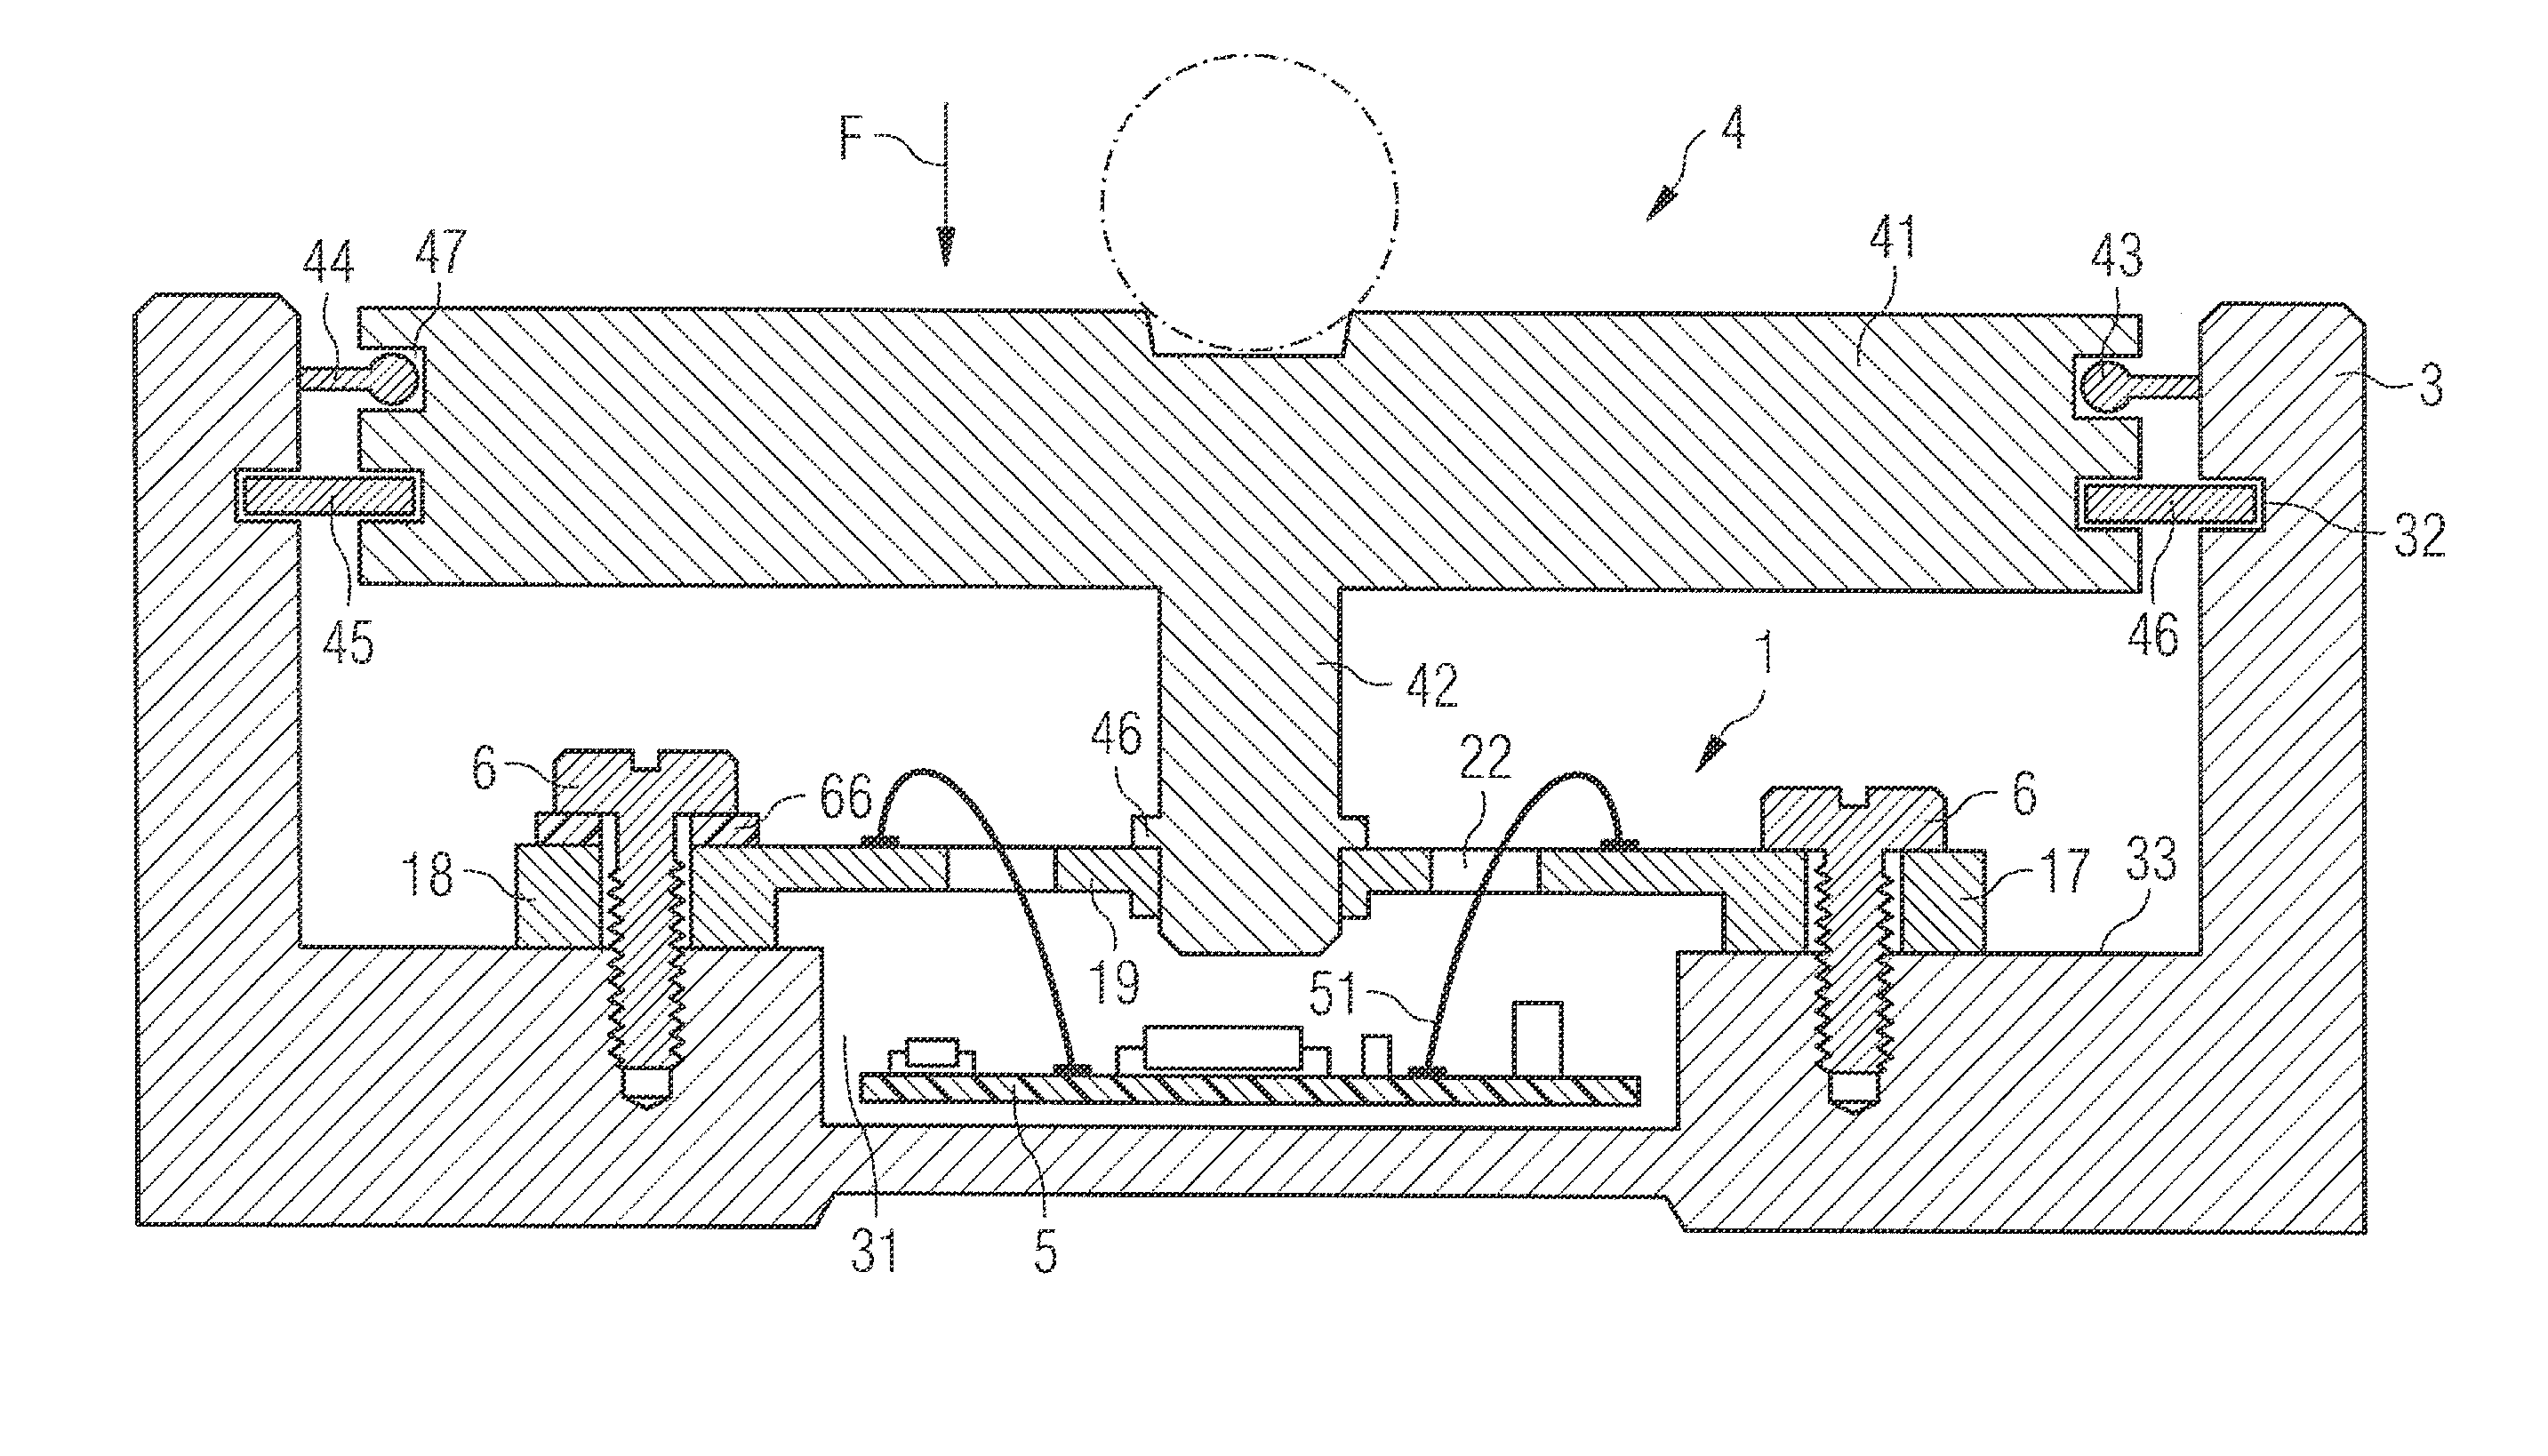 Force sensor including sensor plate with local differences in stiffness